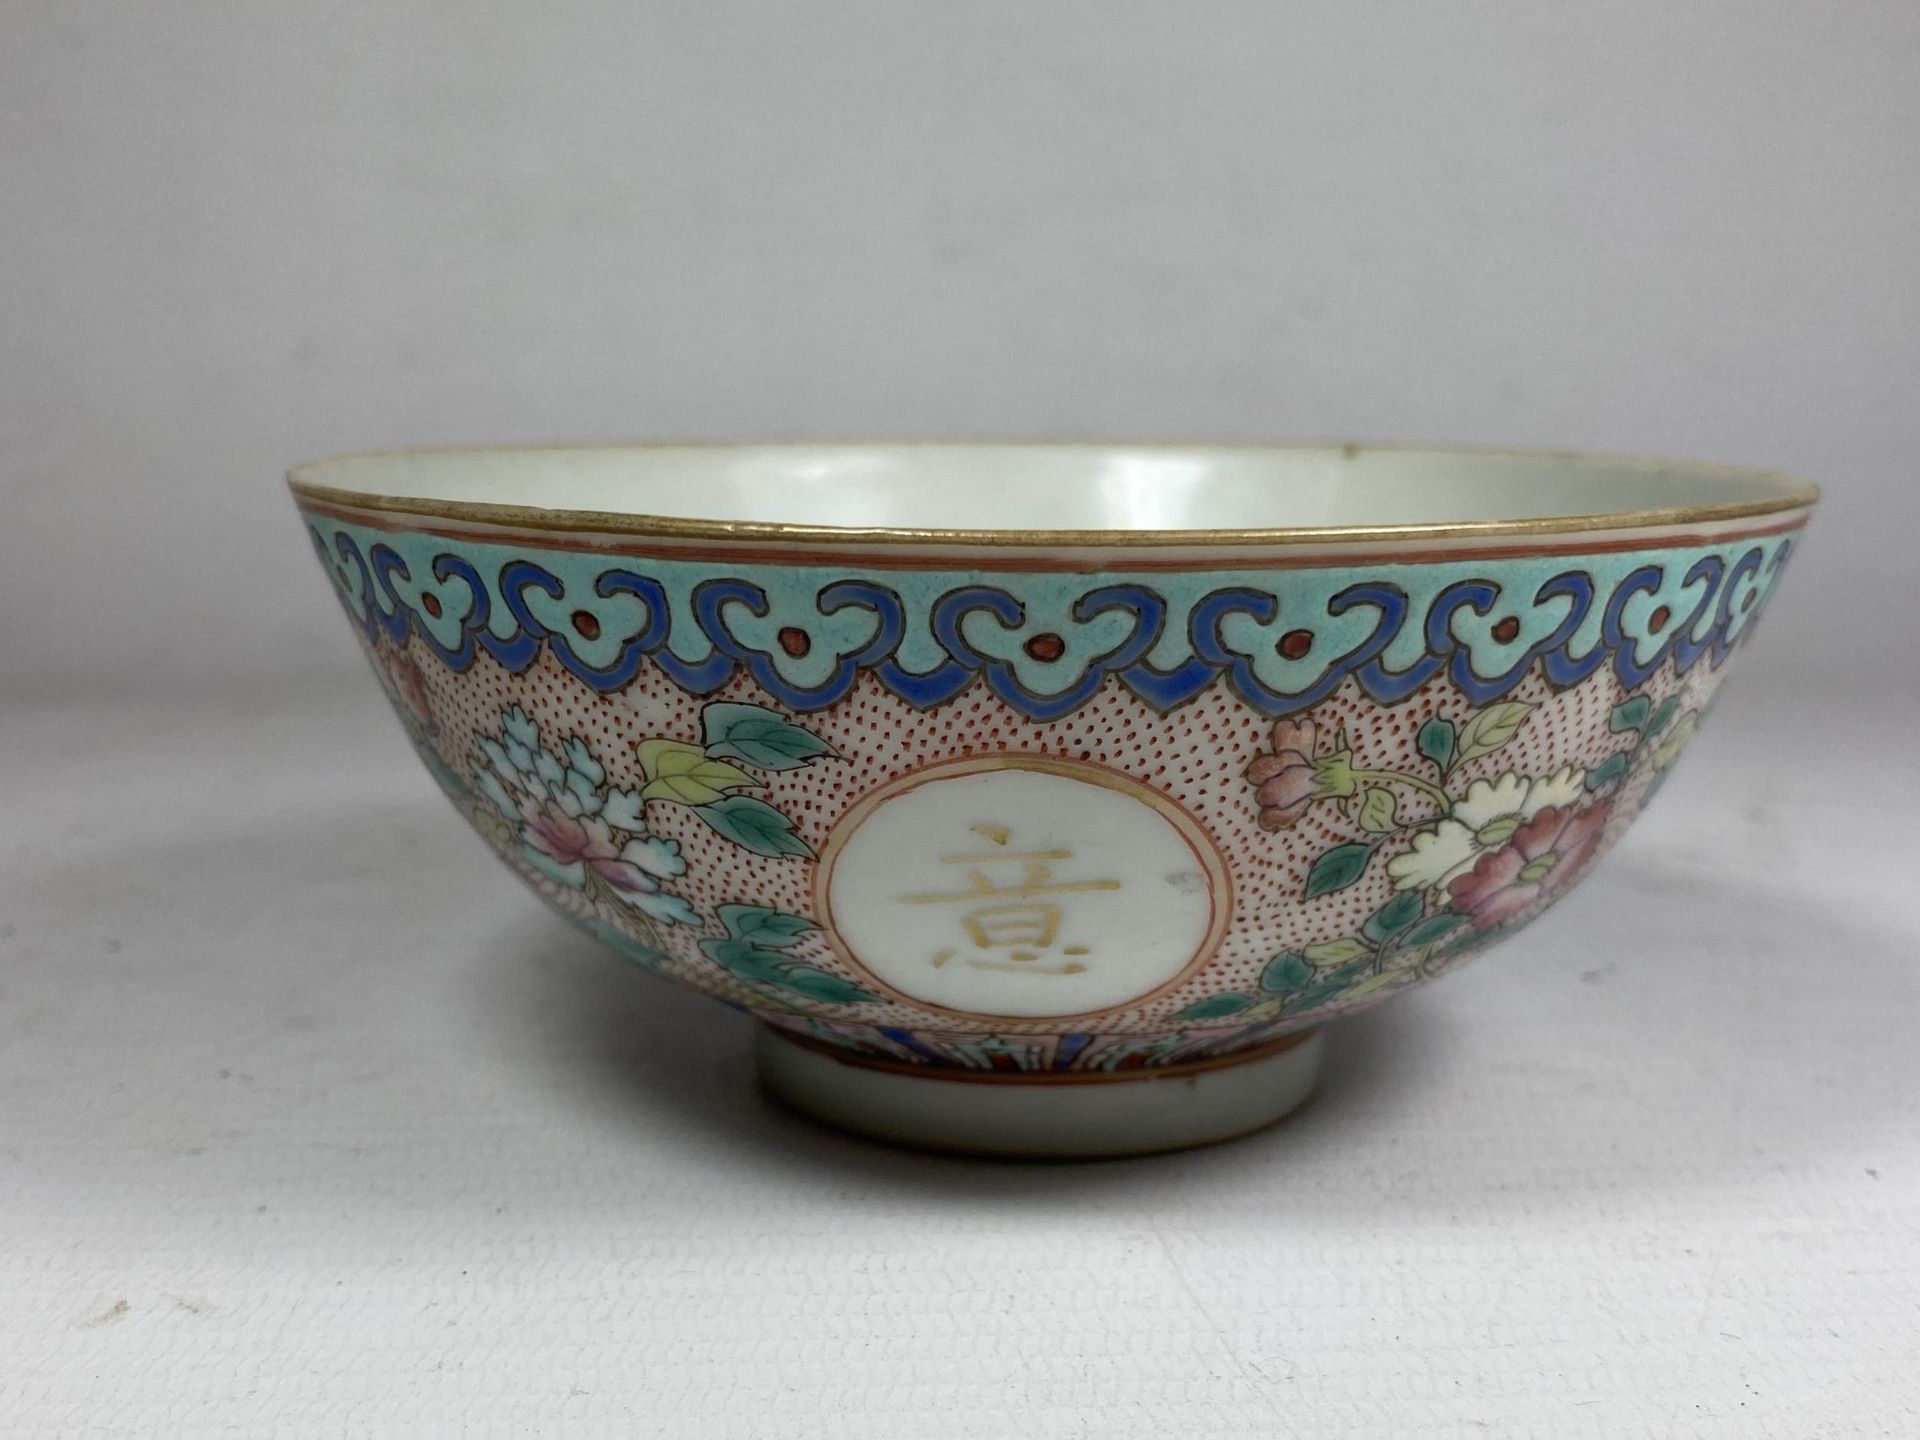 AN EARLY 20TH CENTURY FAMILLE ROSE FLORAL DESIGN PORCELAIN BOWL, FOUR CHARACTER MARK TO BASE, - Image 2 of 6